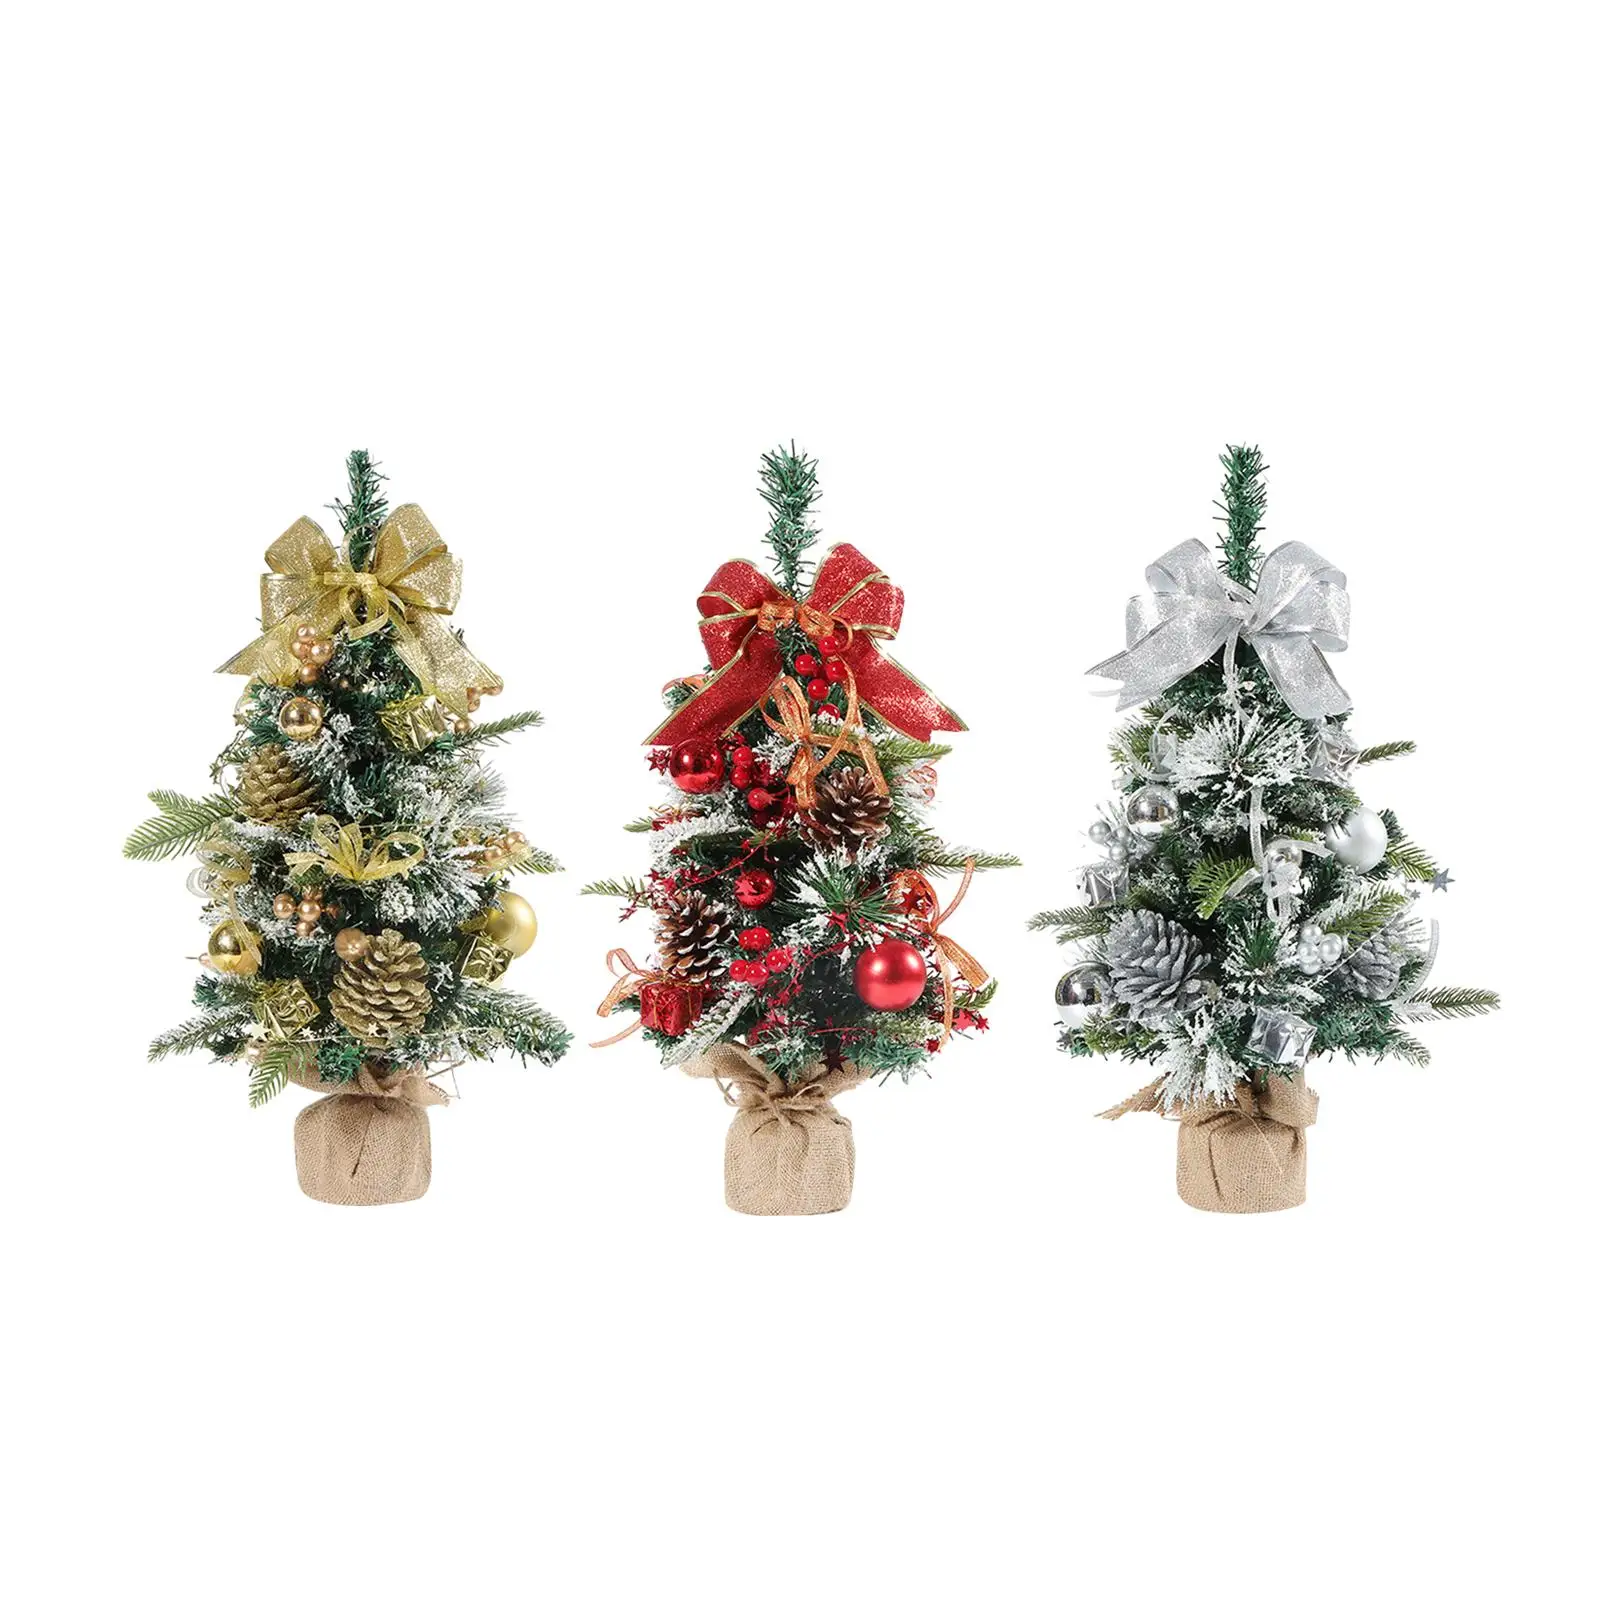 Tabletop Christmas Tree Artificial Branches Desktop Mini Christmas Tree Decor for Fireplace Office Shelf Festivals Table